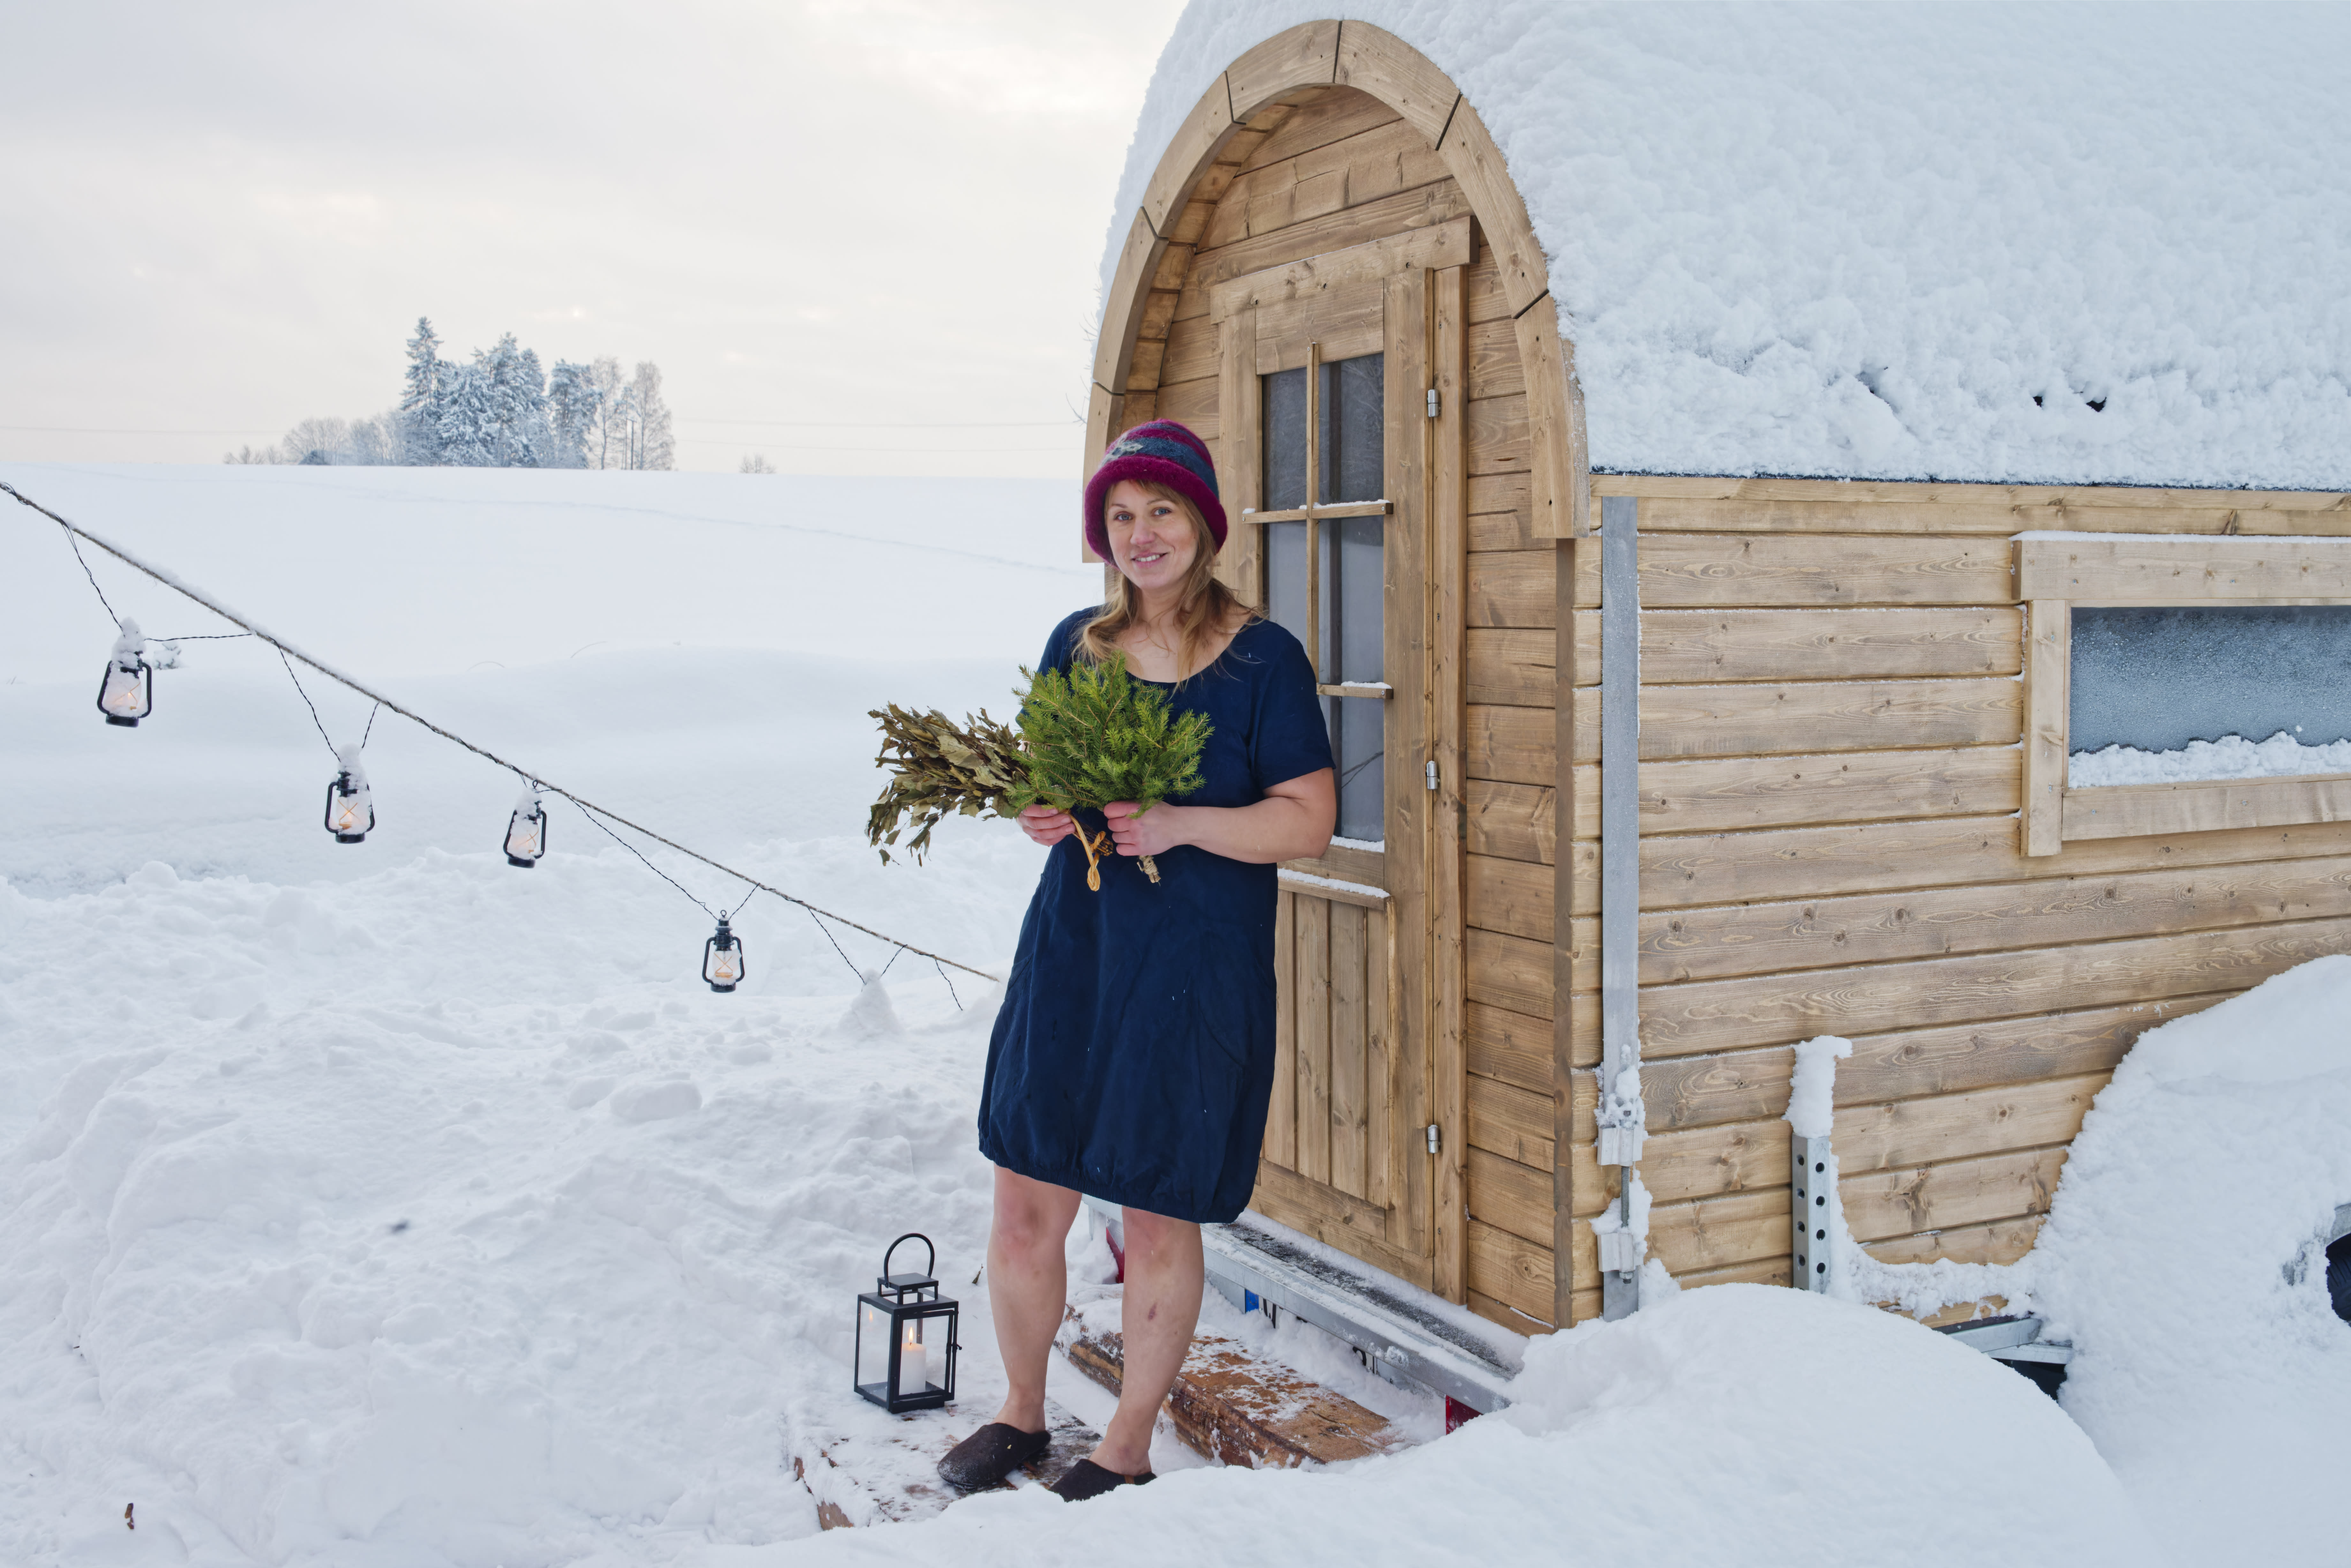 Finding Christmas peace in a hot Finnish sauna